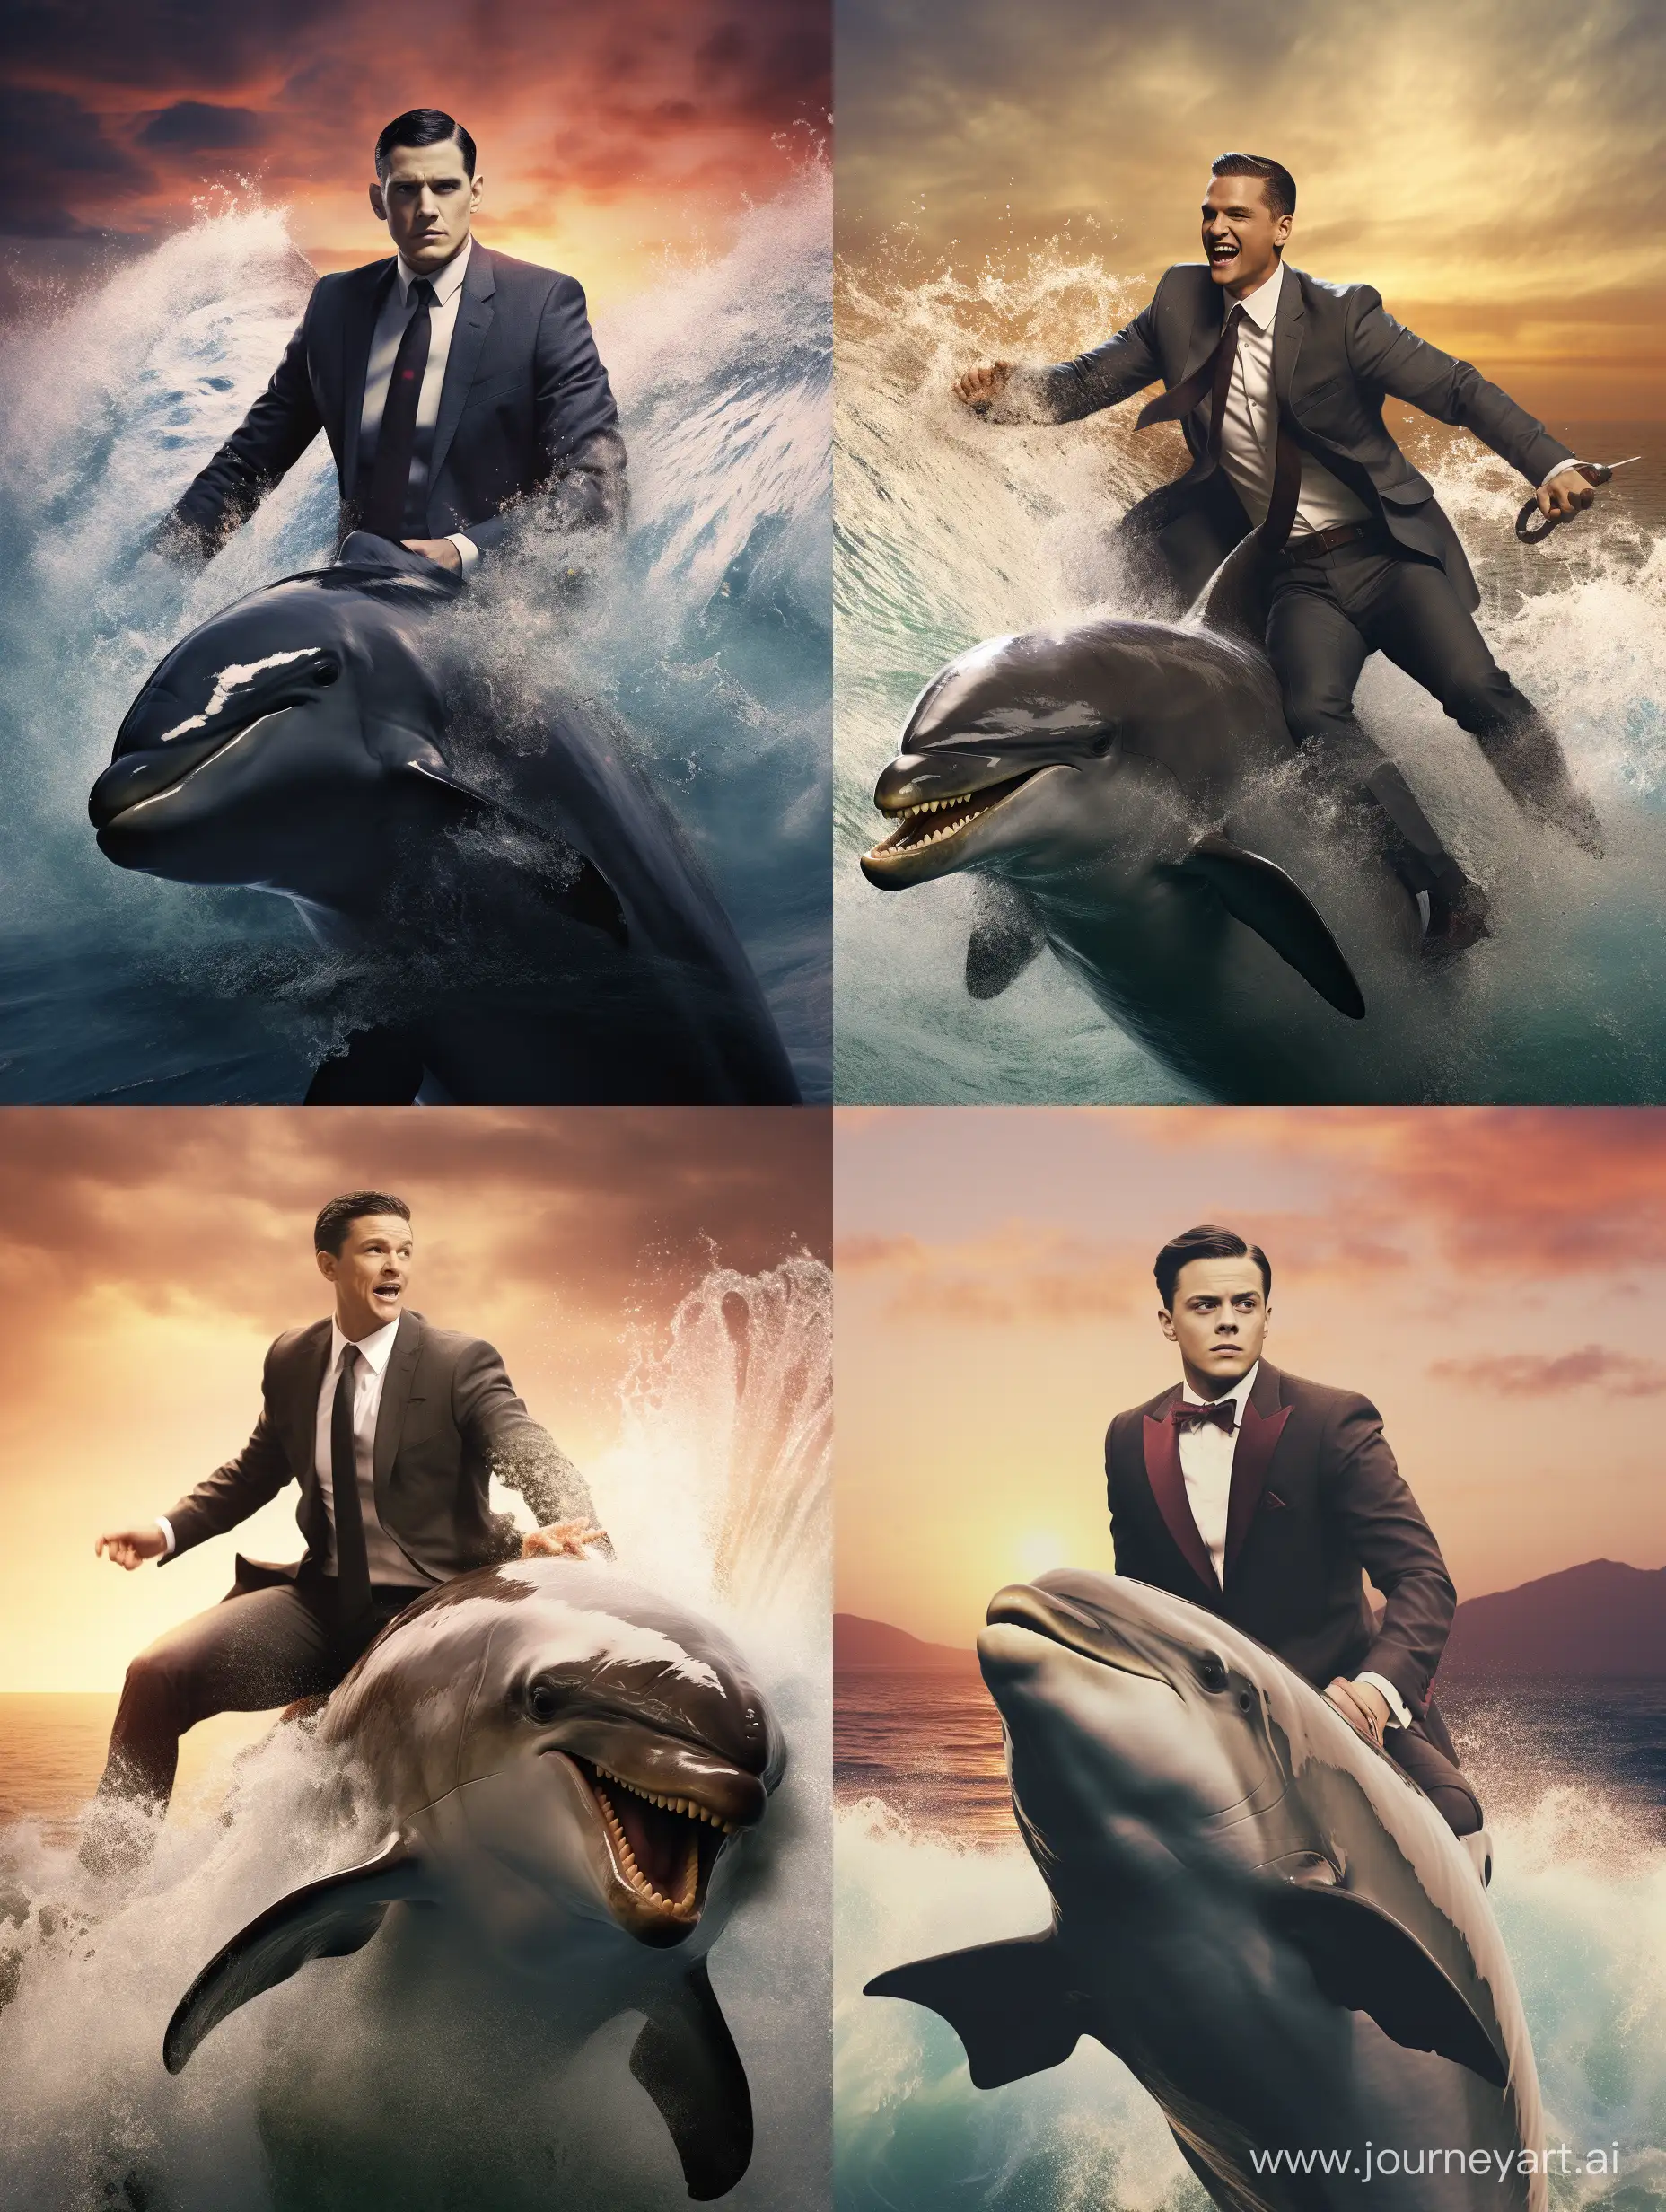 A man in a suit riding a dolphin in the sea